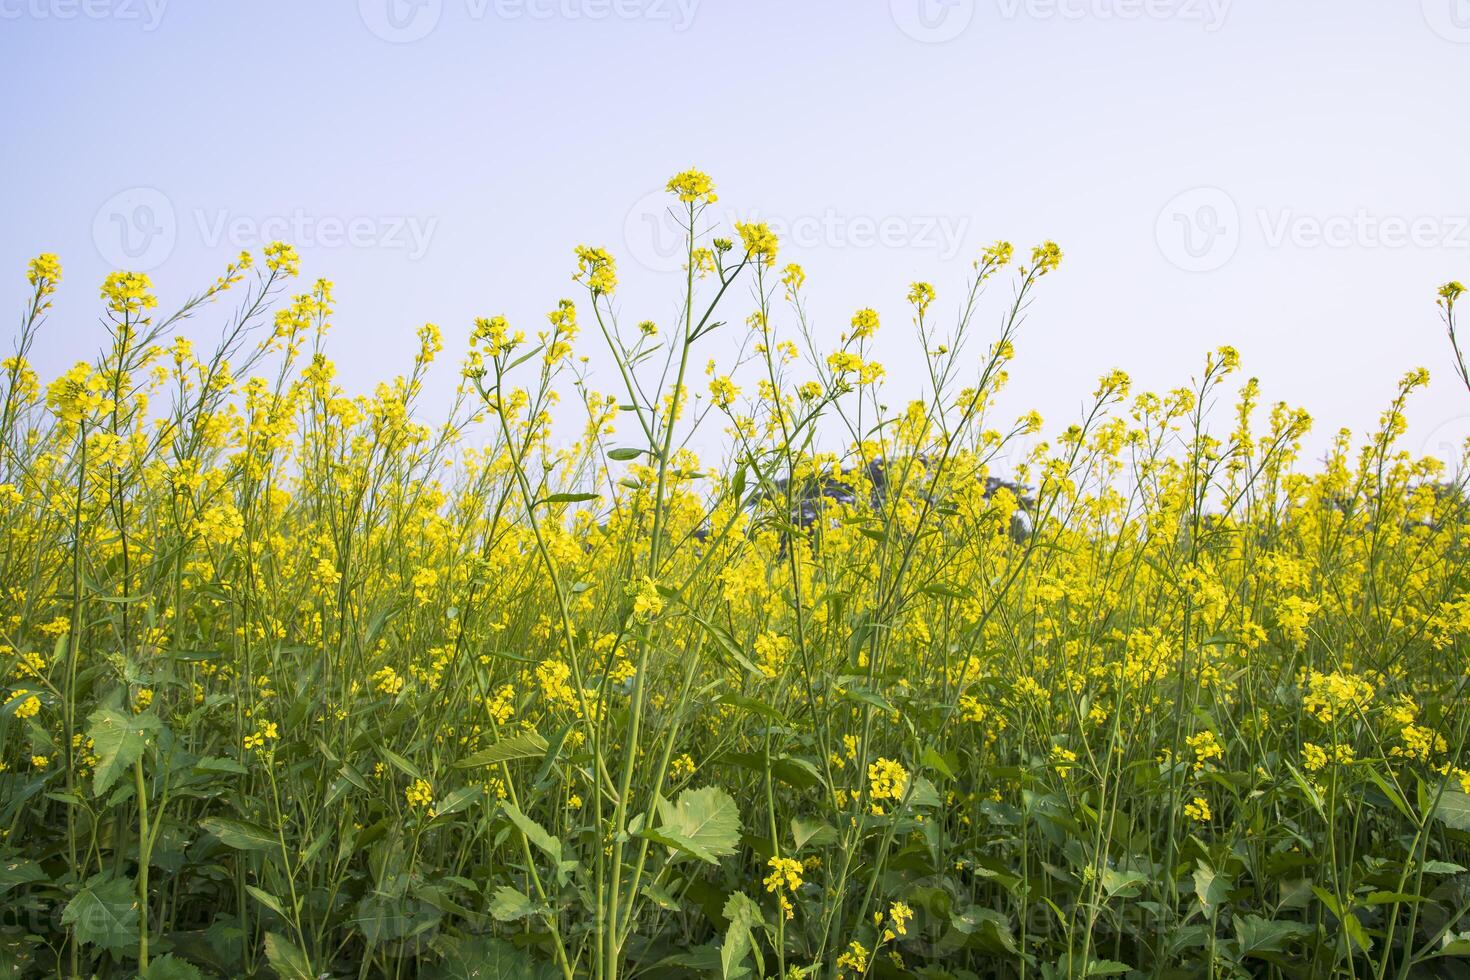 Outdoor yellow Rapeseed Flowers Field Countryside of Bangladesh photo